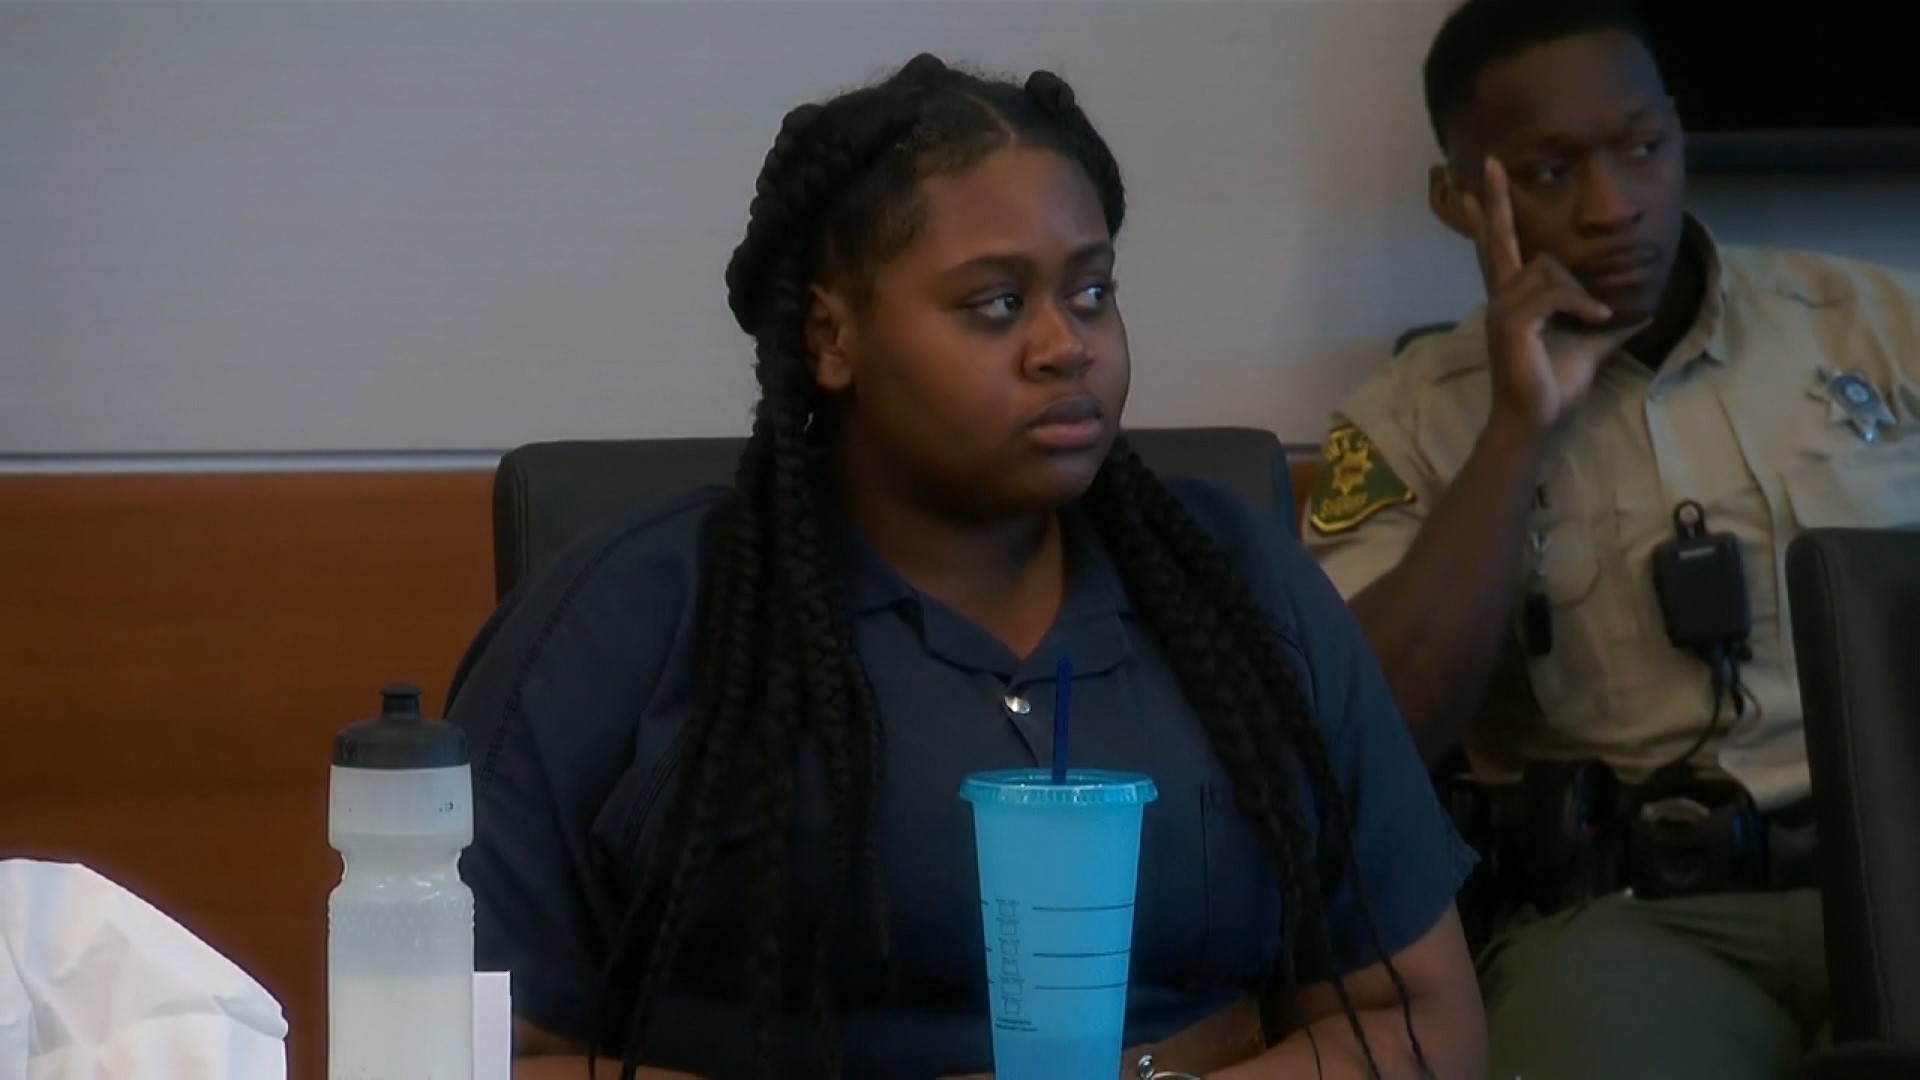 She was scheduled for a sentencing hearing today, but a judge granted a request to push it back after her attorneys suggested she undergo a new psych evaluation.